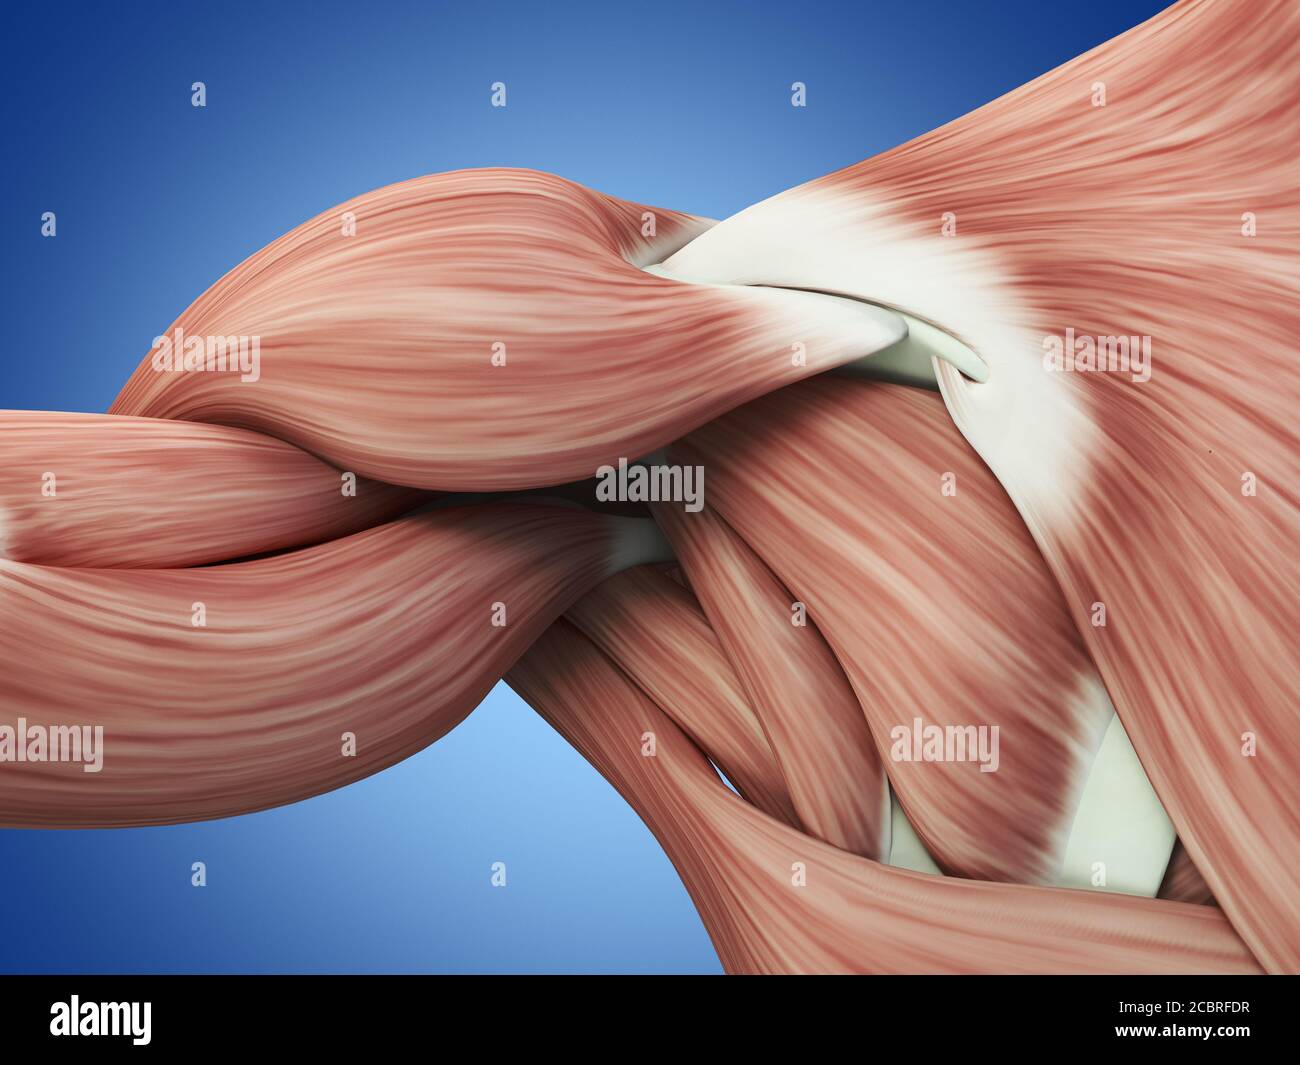 Anatomy illustration of human shoulder muscles. Stock Photo